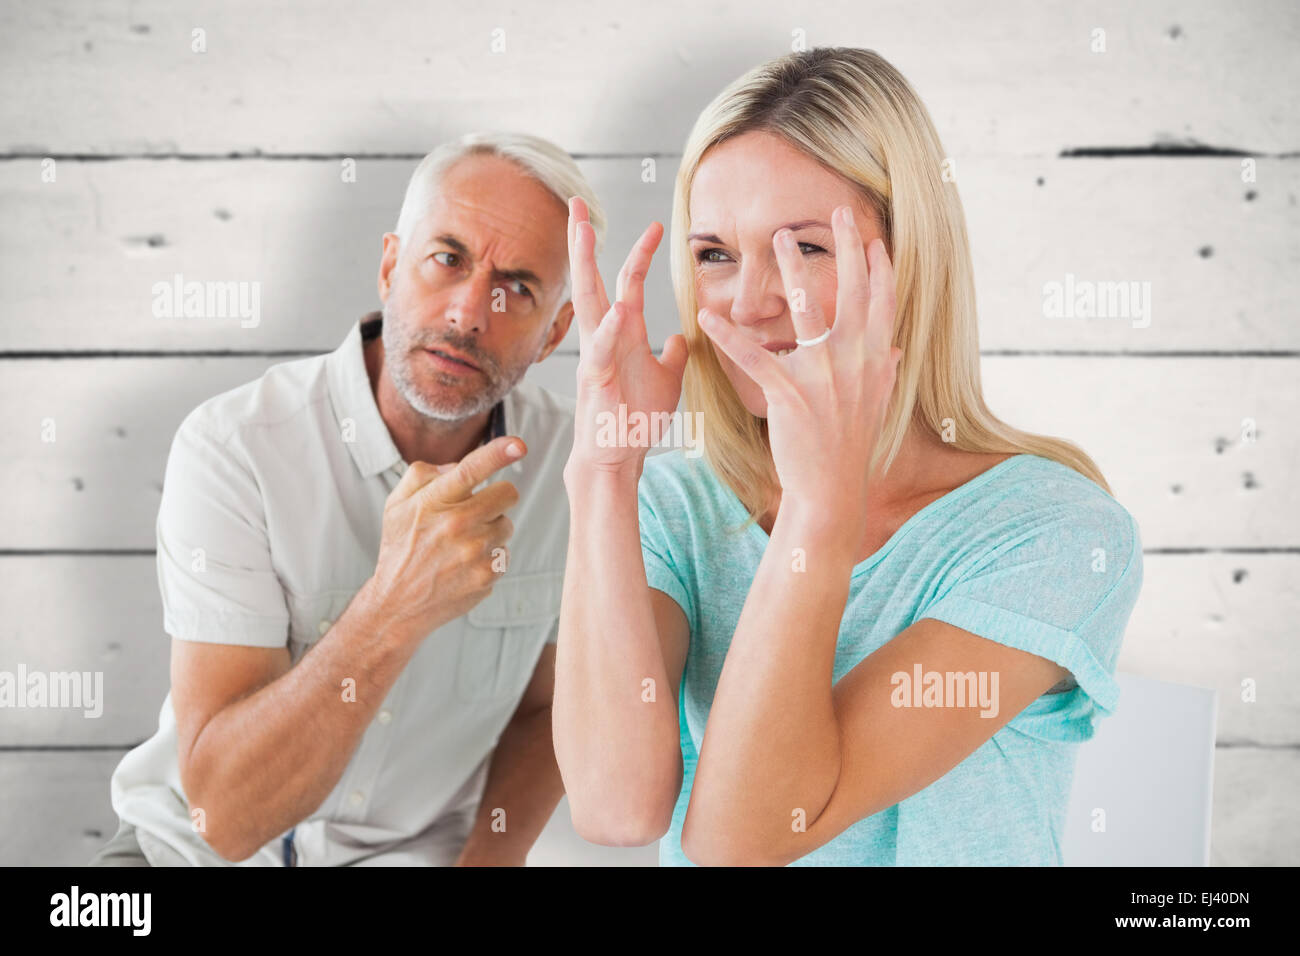 Composite image of unhappy couple sitting on chairs having an argument Stock Photo